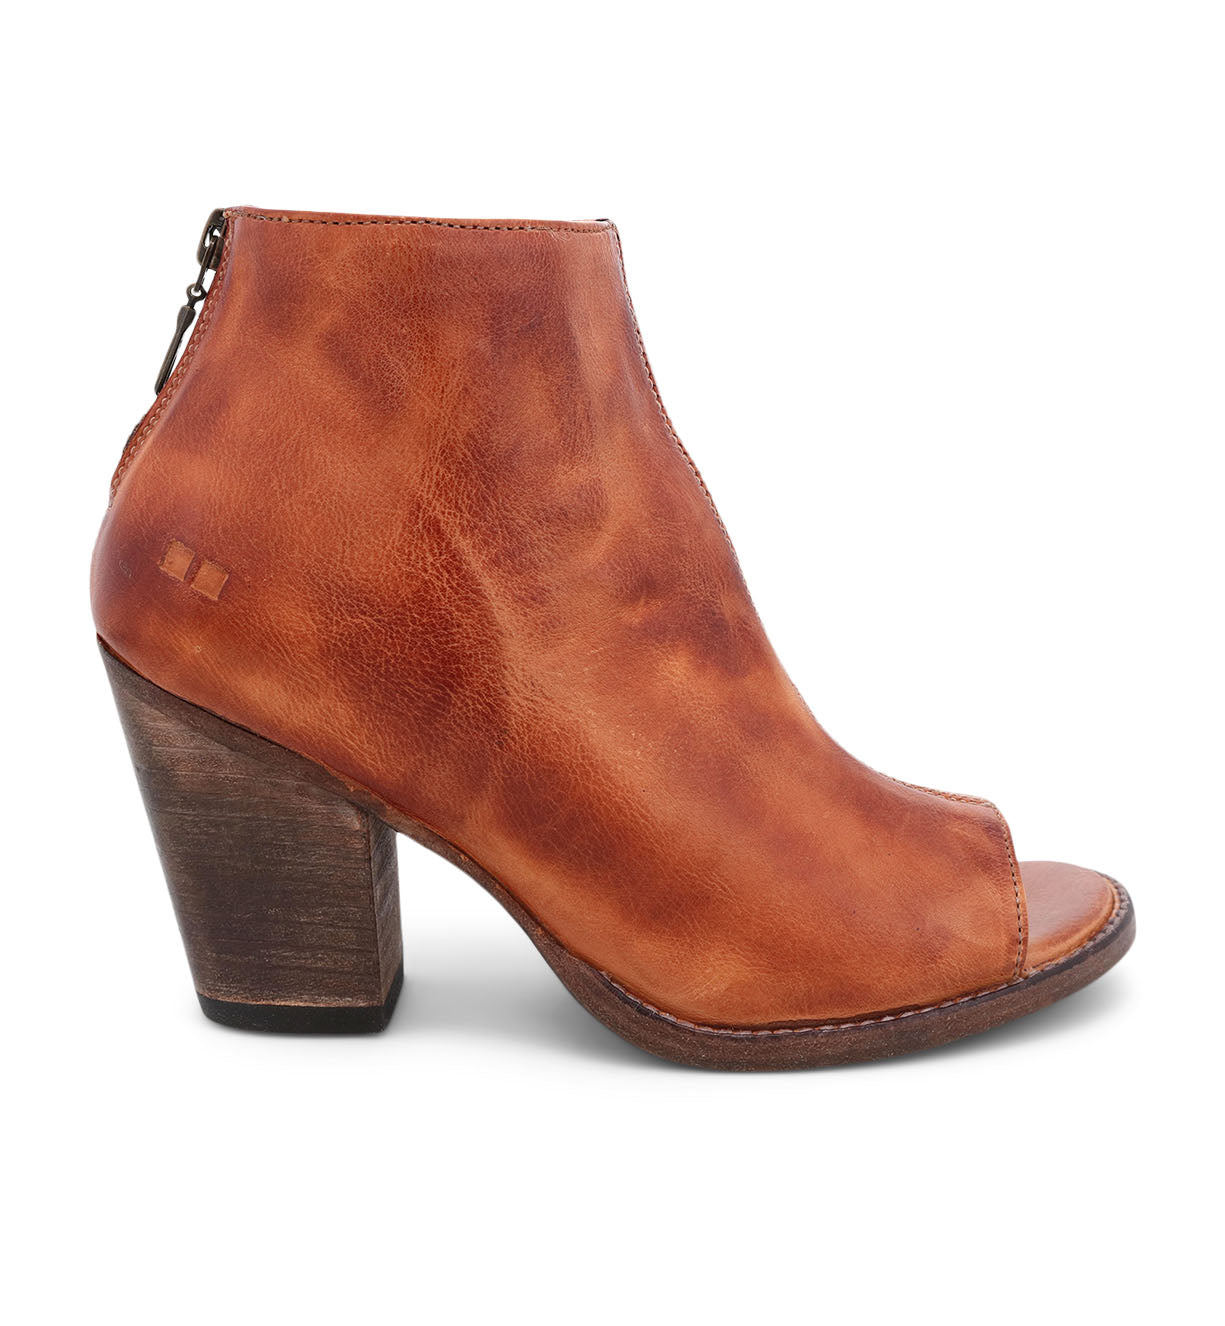 A Onset leather ankle boot with a wooden heel from Bed Stu.